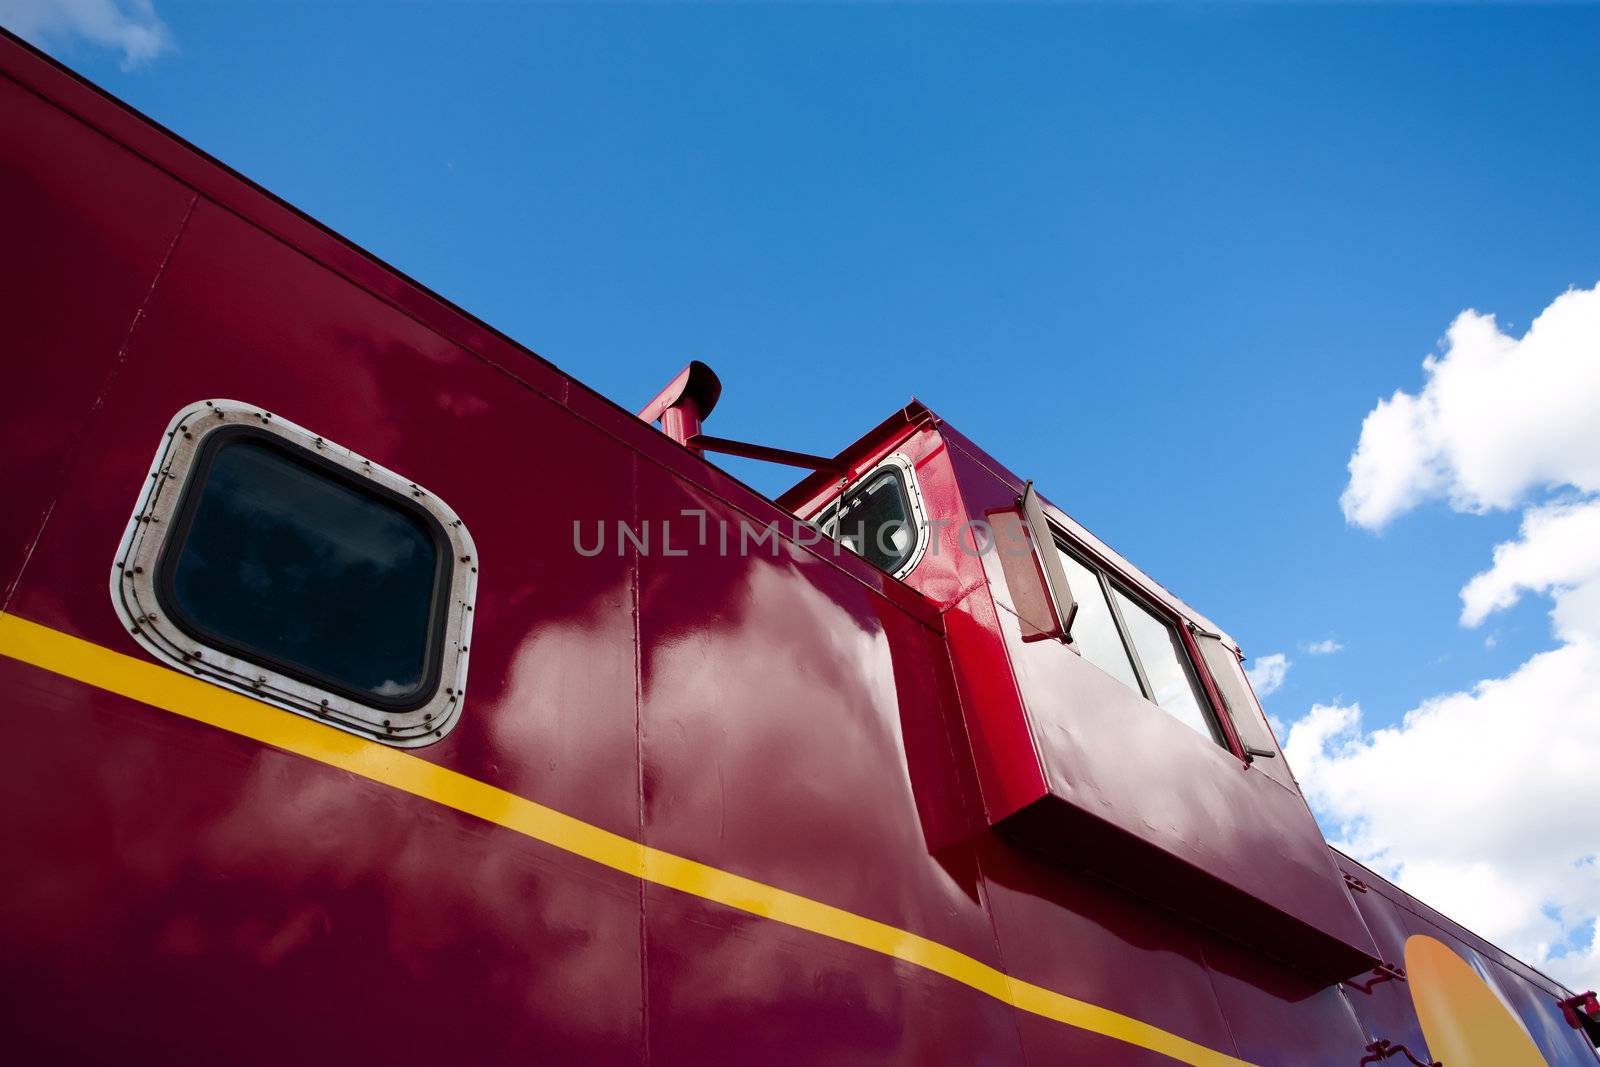 Detail of a shiny red train caboose